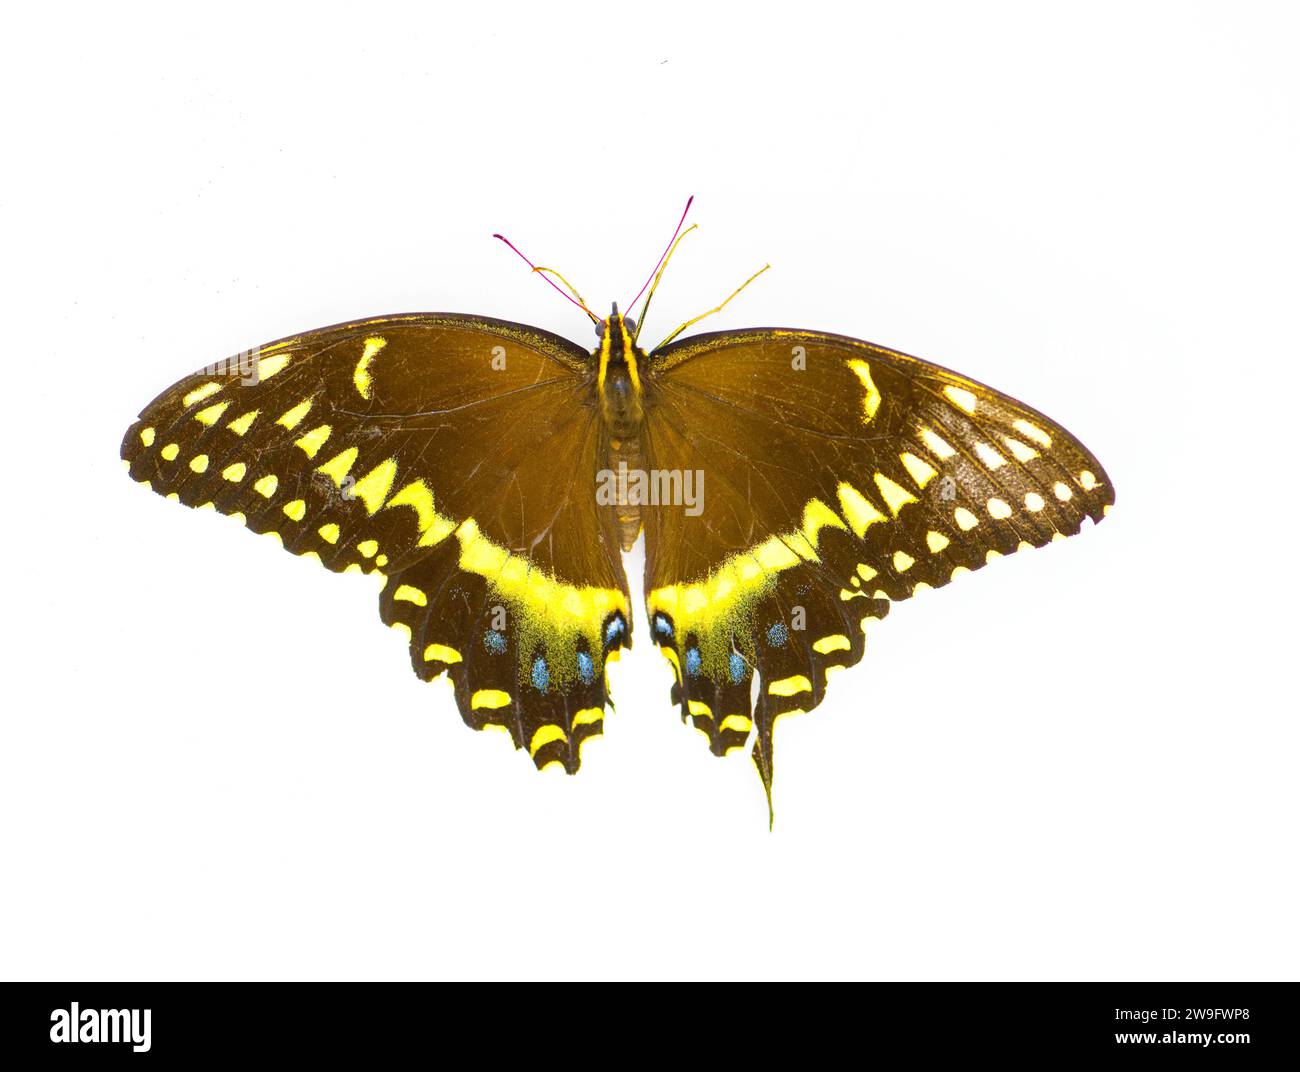 Palamedes swallowtail, laurel swallowtail butterfly - Papilio palamedes - isolated on white background top dorsal view Stock Photo